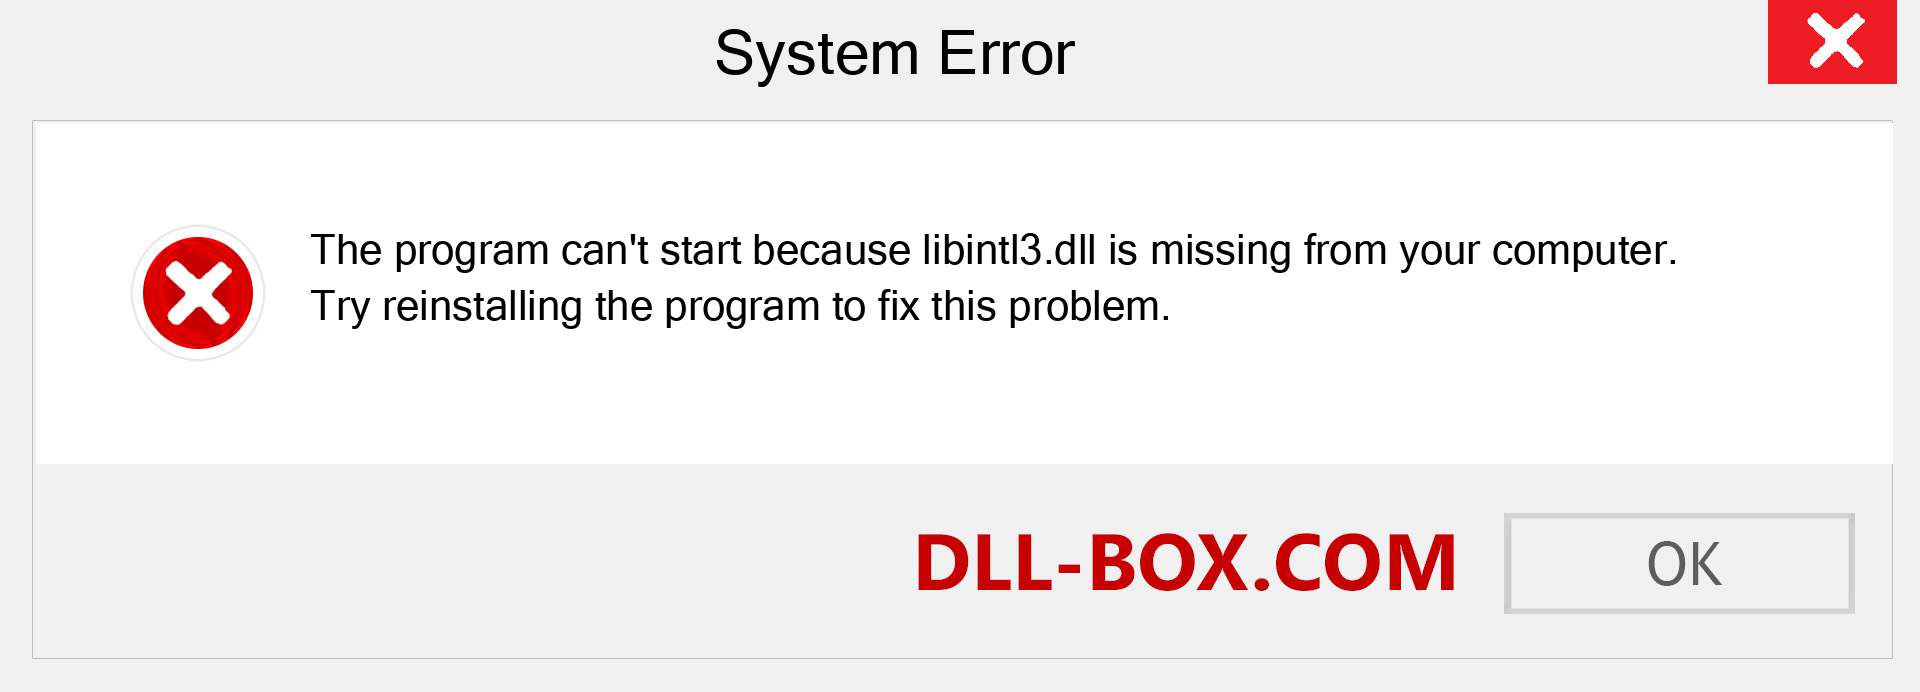  libintl3.dll file is missing?. Download for Windows 7, 8, 10 - Fix  libintl3 dll Missing Error on Windows, photos, images